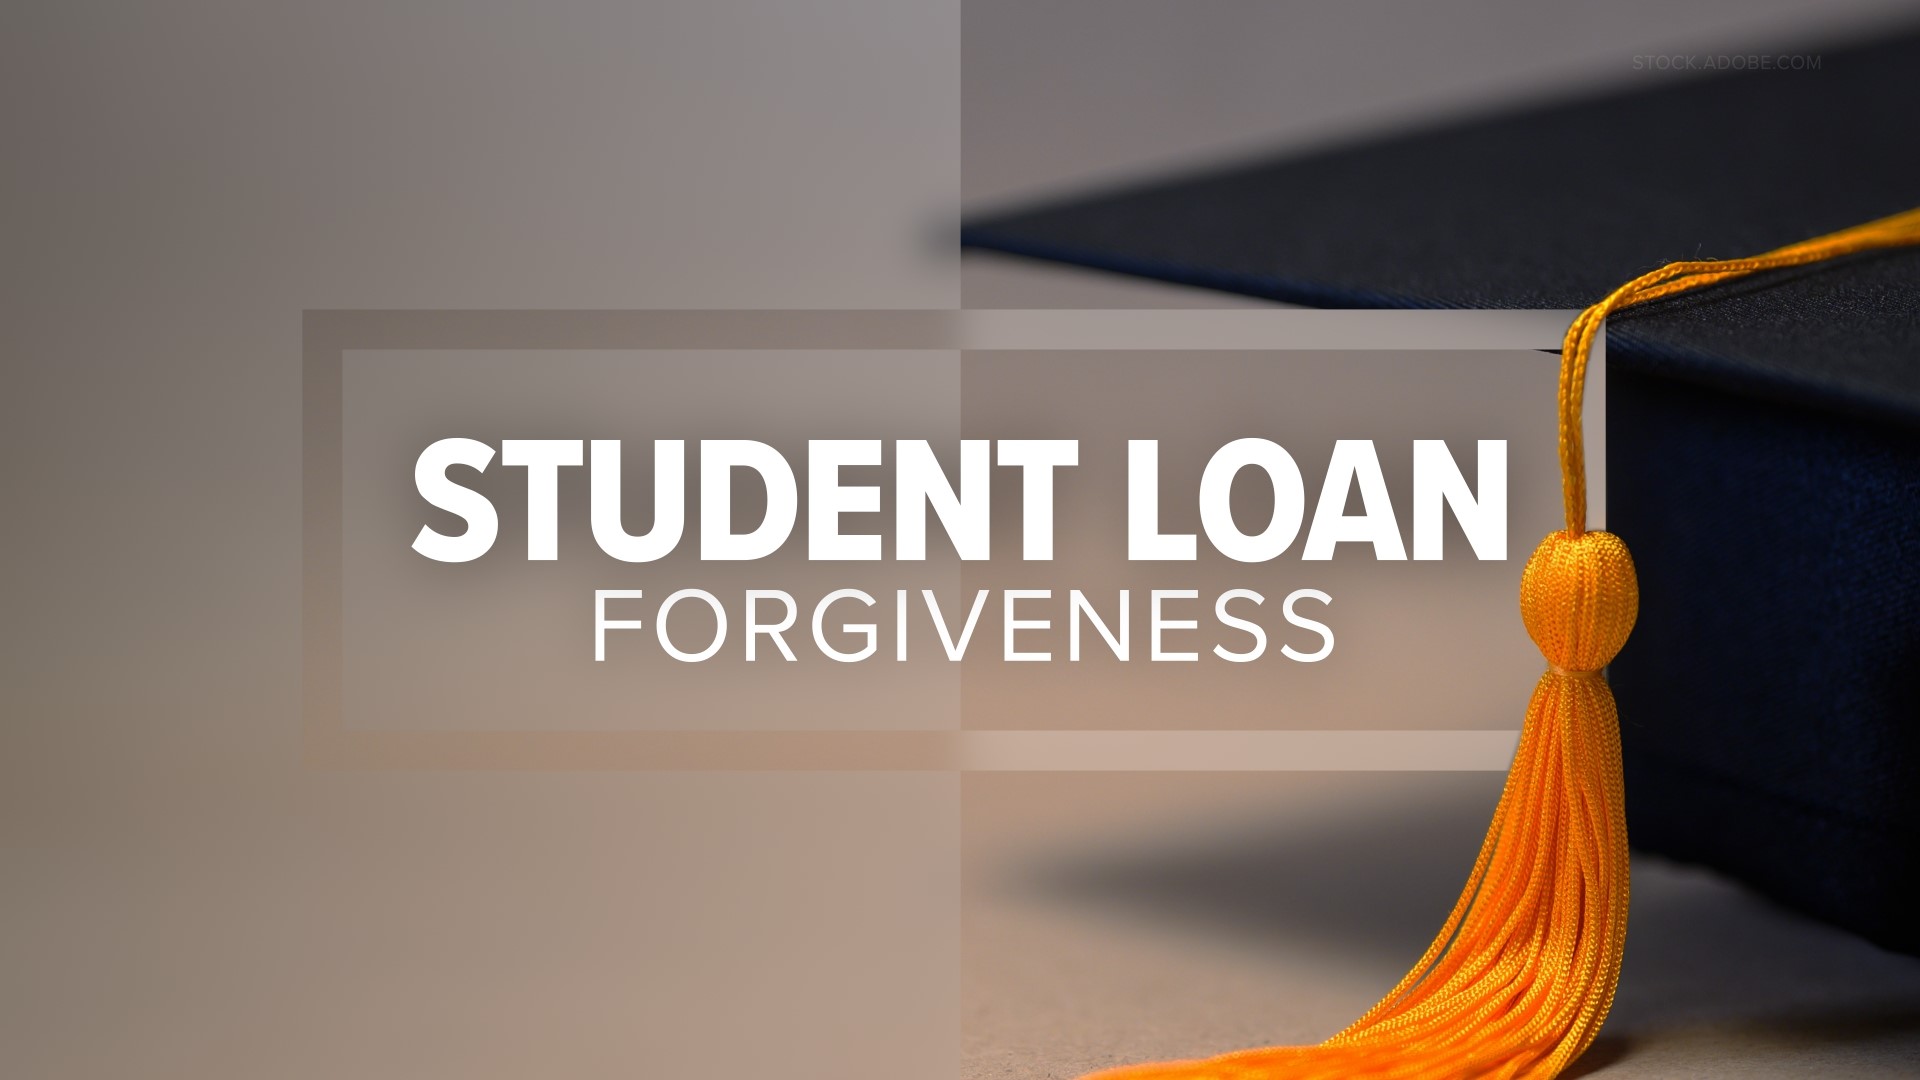 Student loan forgiveness application site launches after beta test.